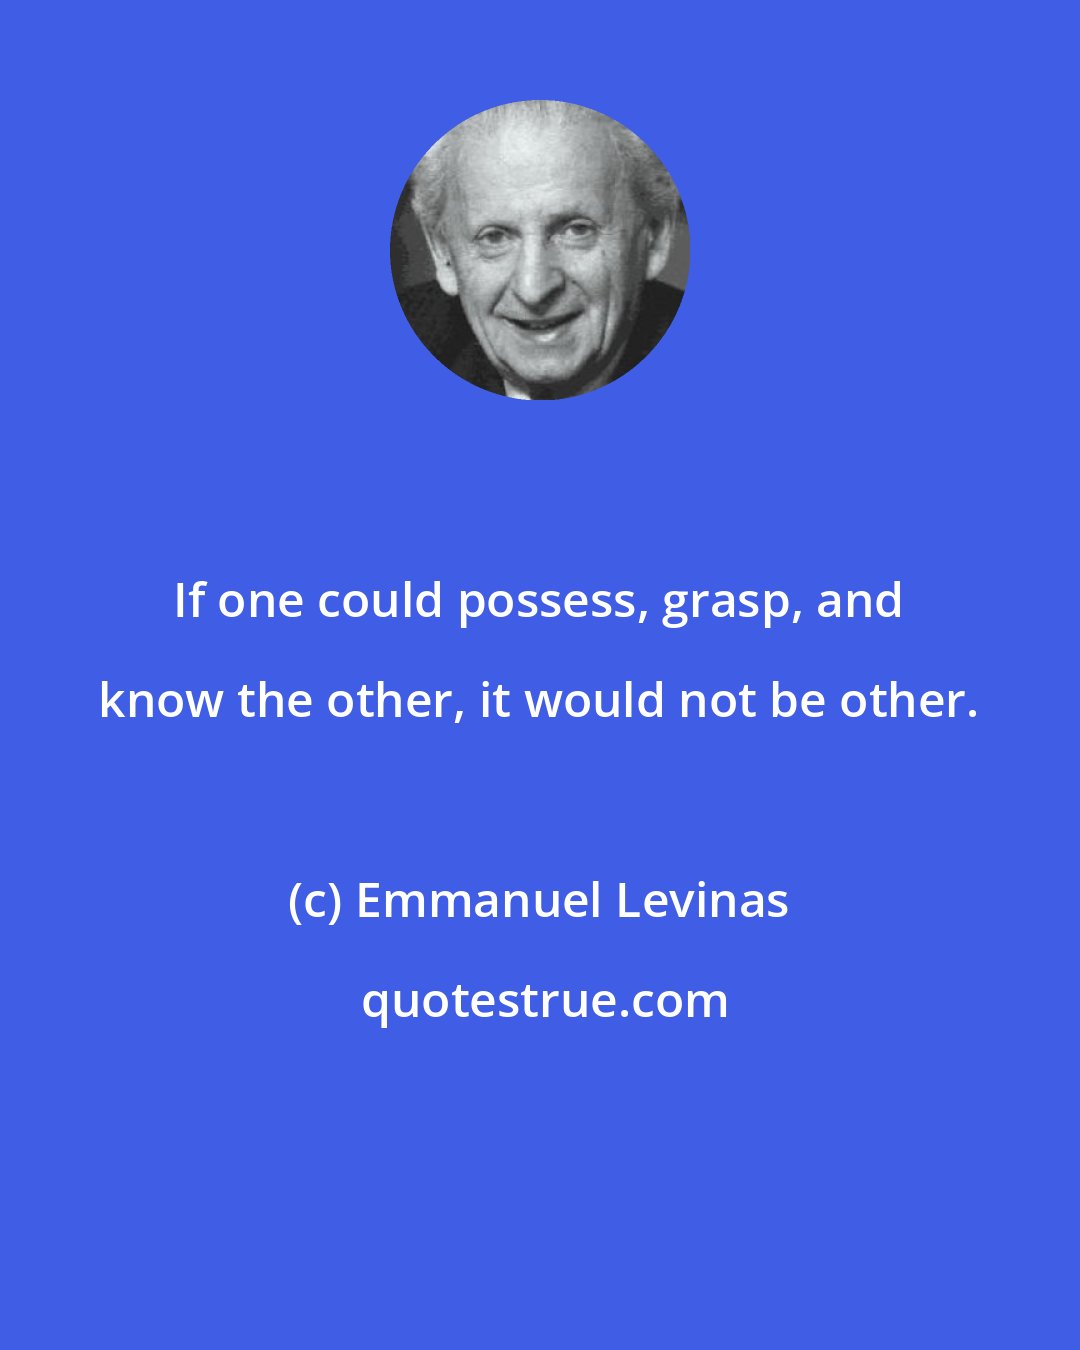 Emmanuel Levinas: If one could possess, grasp, and know the other, it would not be other.